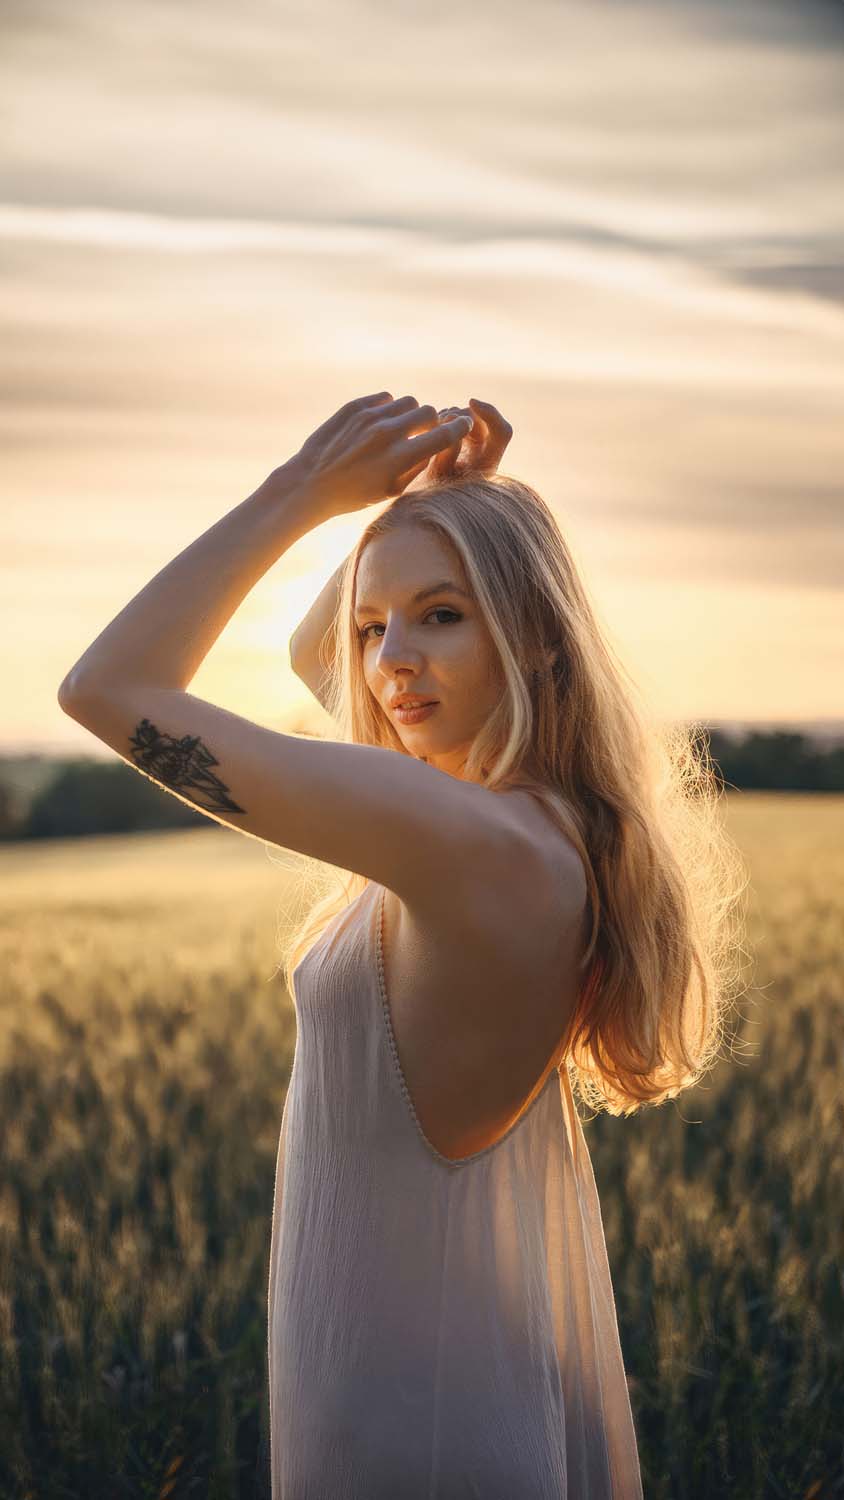 White dress charming girl in sun drenched fields